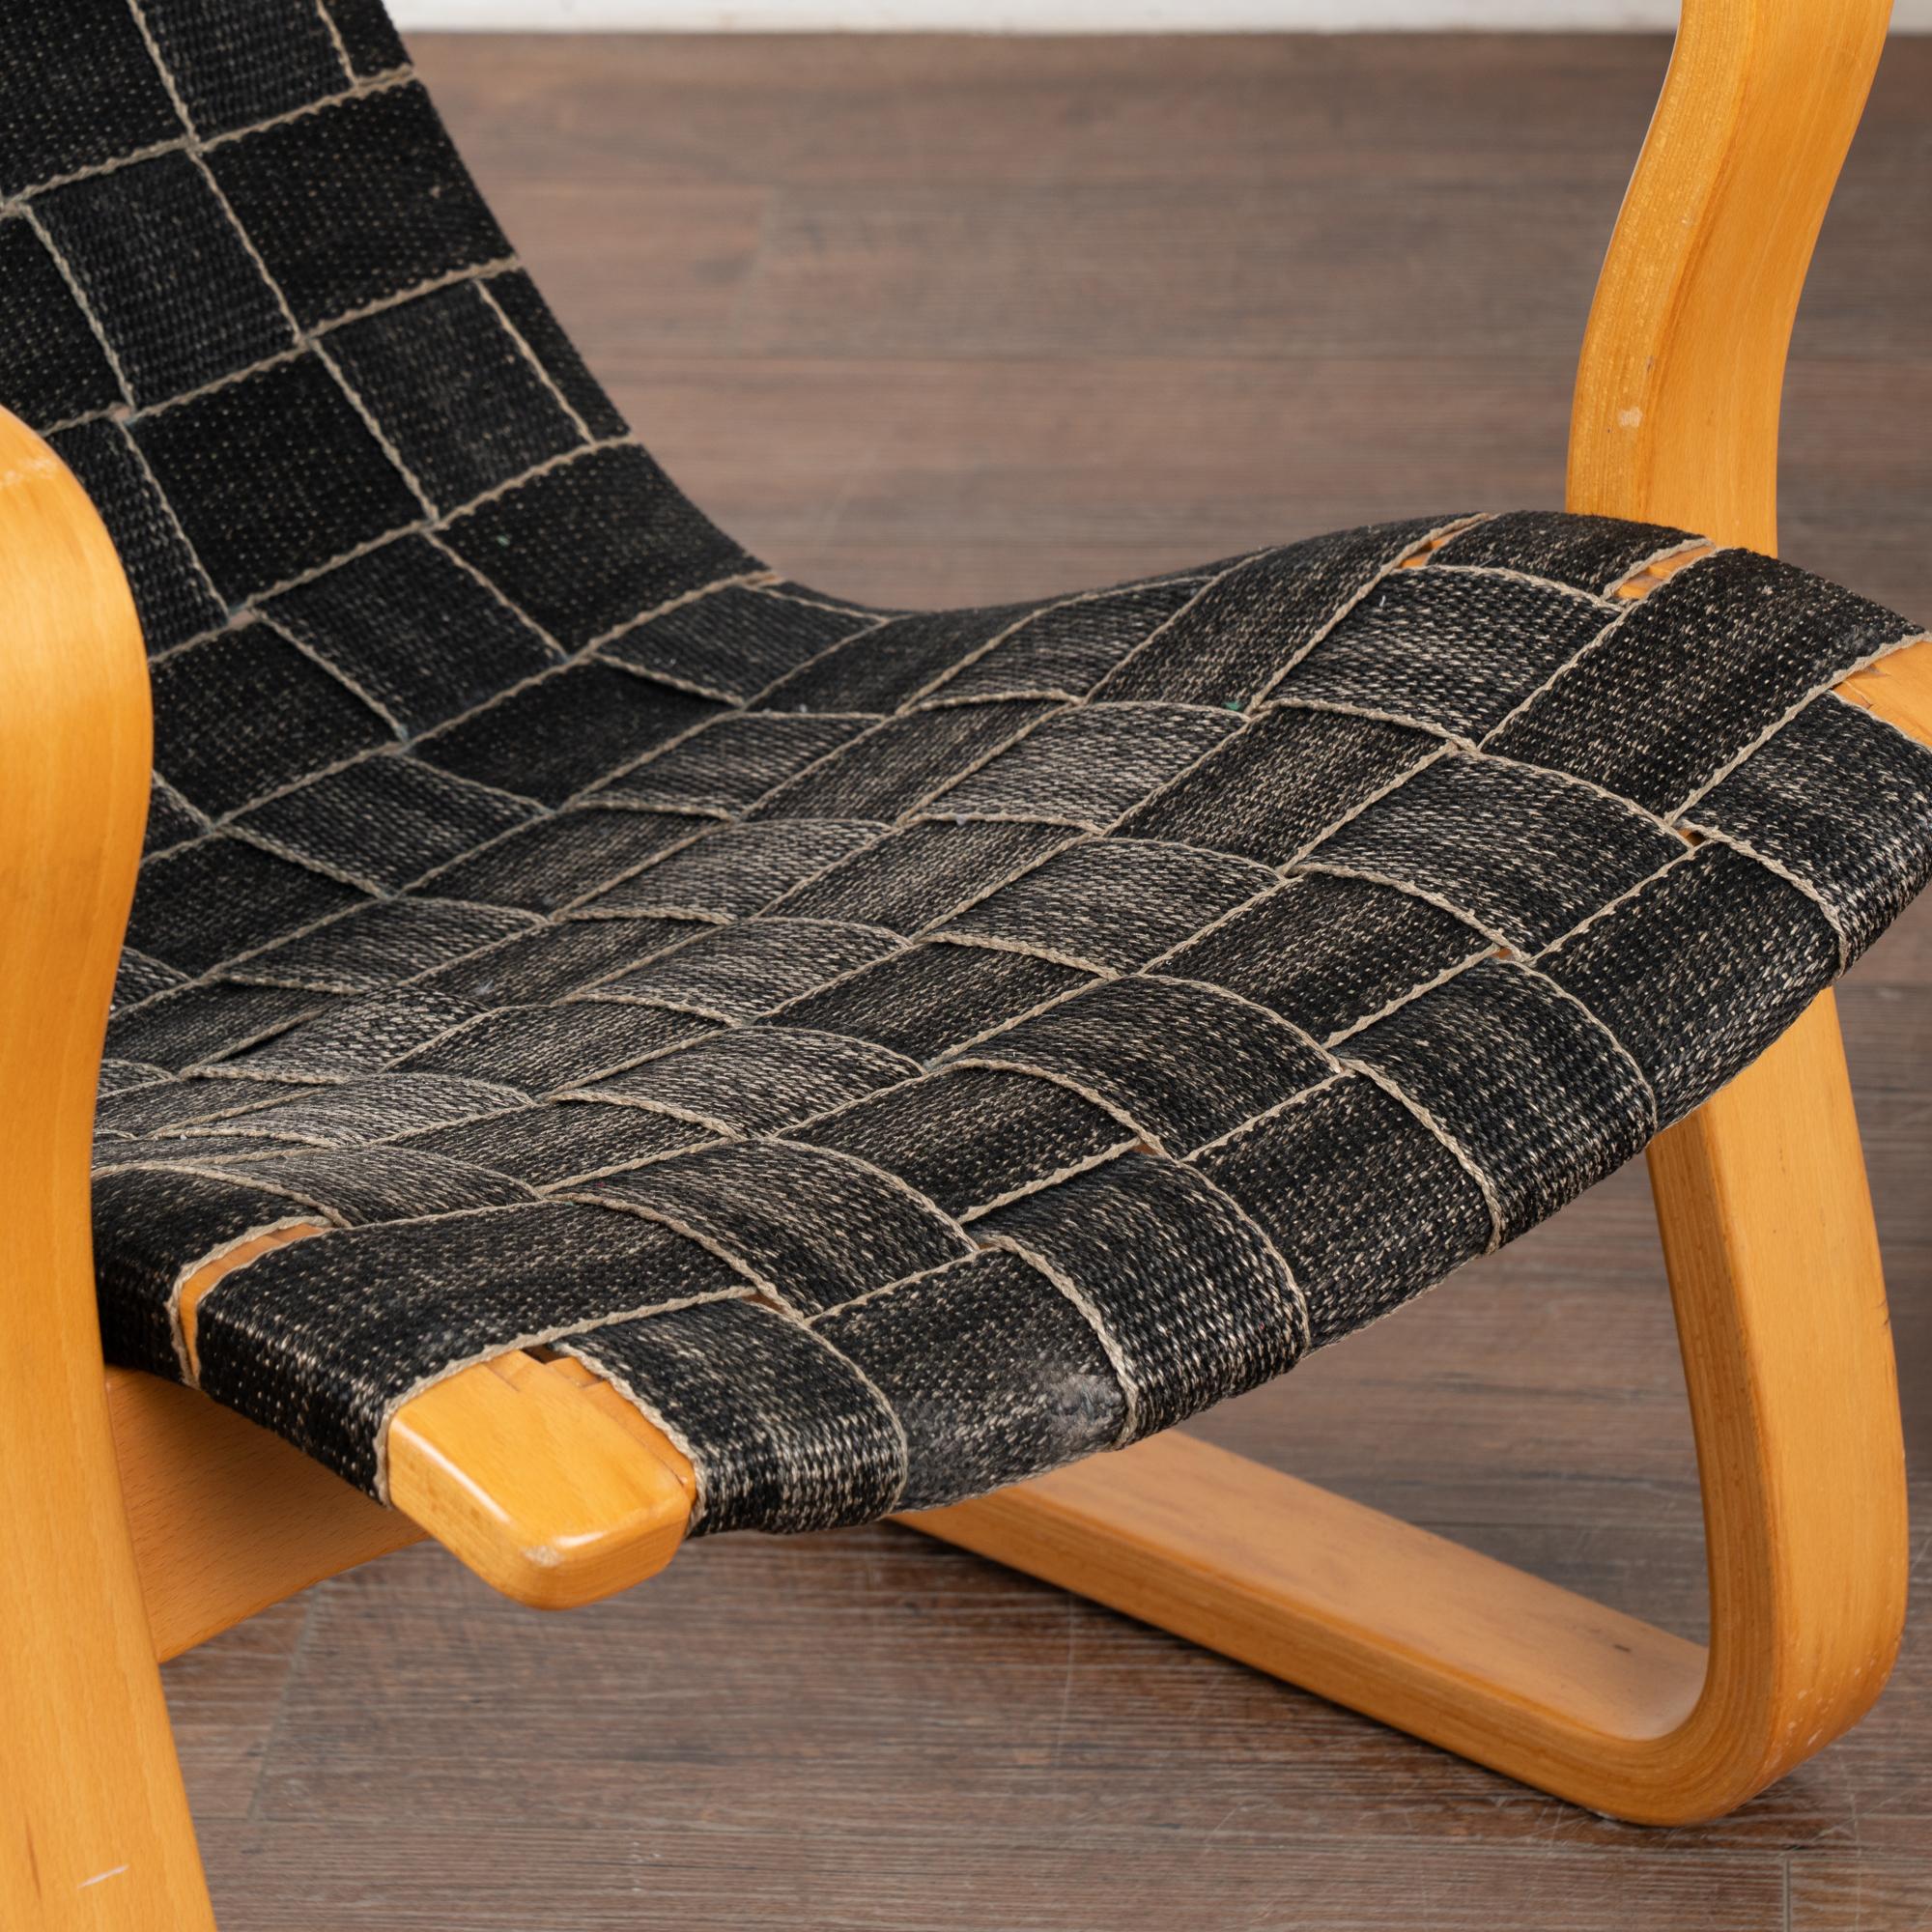 Fabric Mid Century Cantilever Lounge Arm Chairs With Black Webbing, Denmark circa 1970